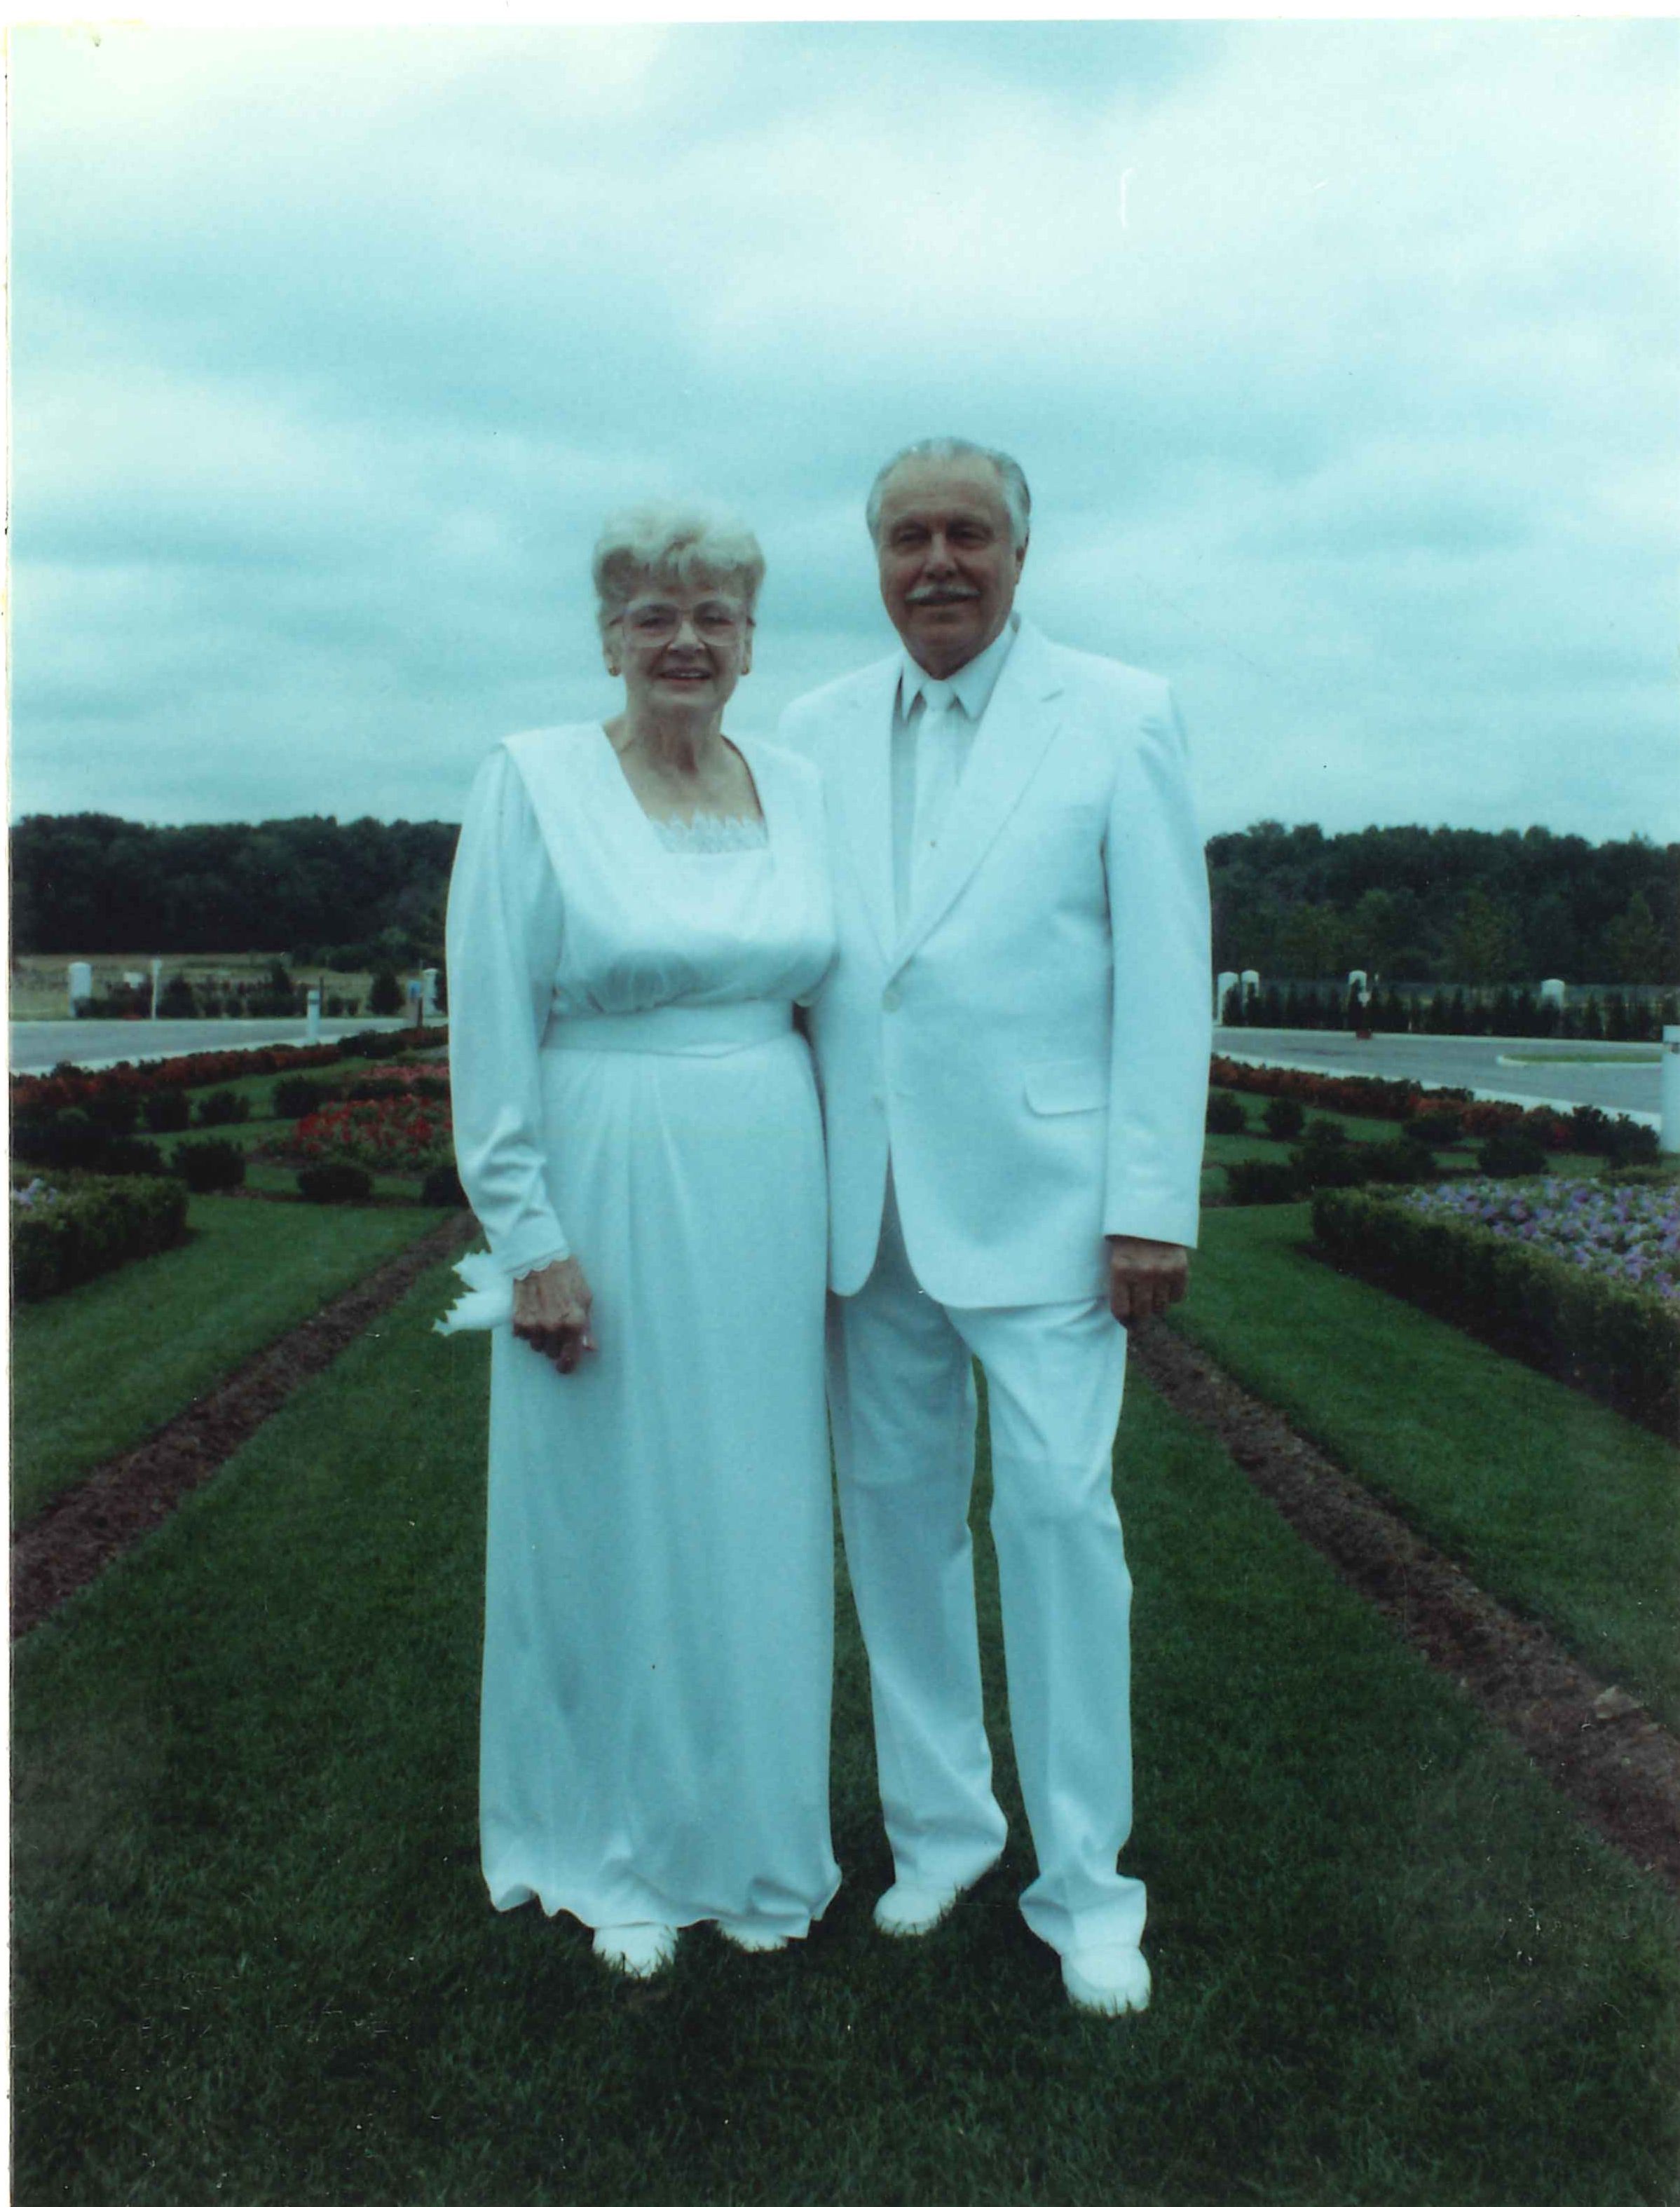 A husband and wife dressed in white